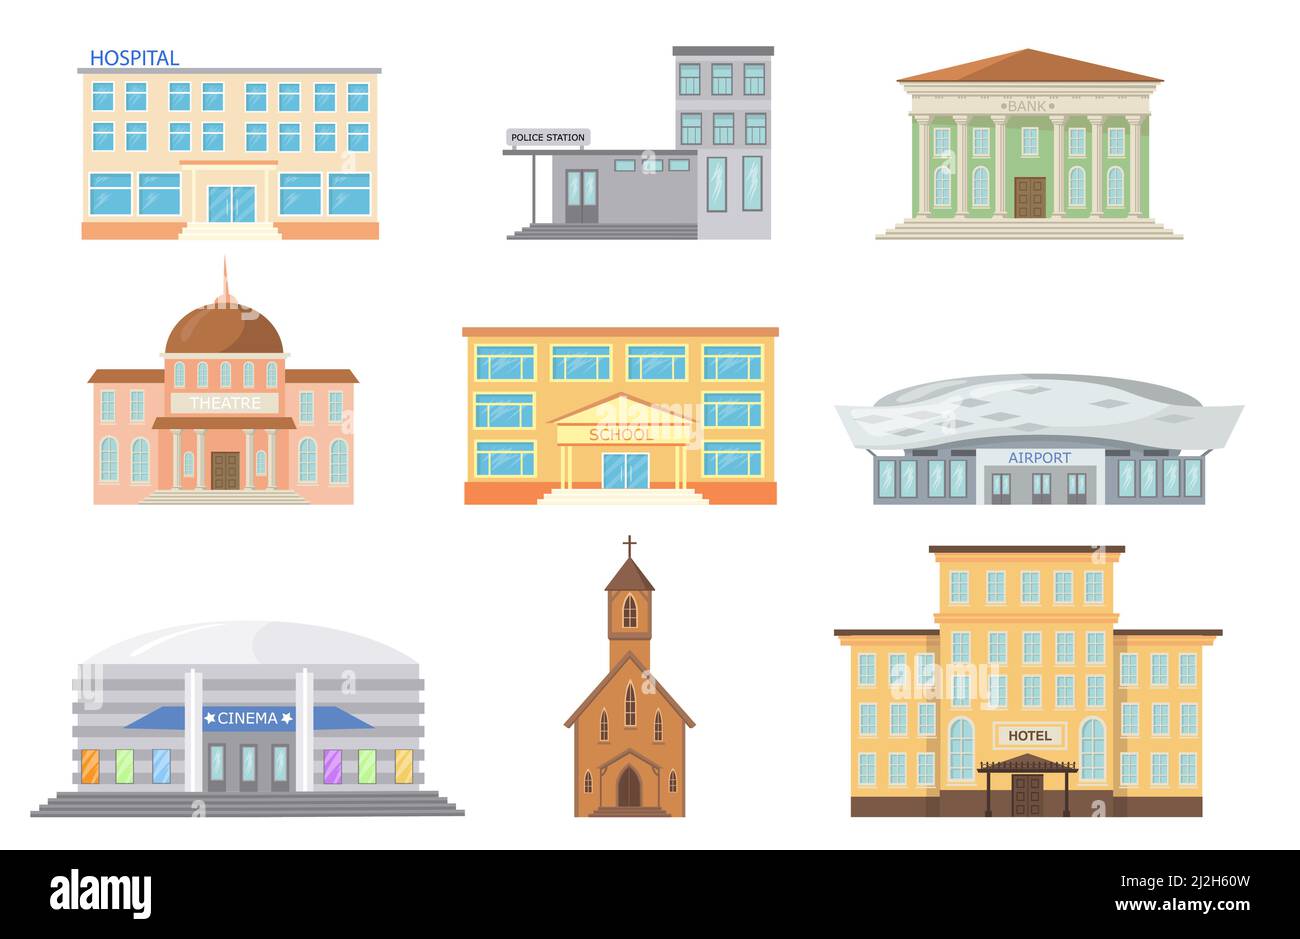 Facades of city buildings vector illustrations set. Hospital, police station, cinema, airport, hotel, church, school, theatre, bank isolated on white Stock Vector